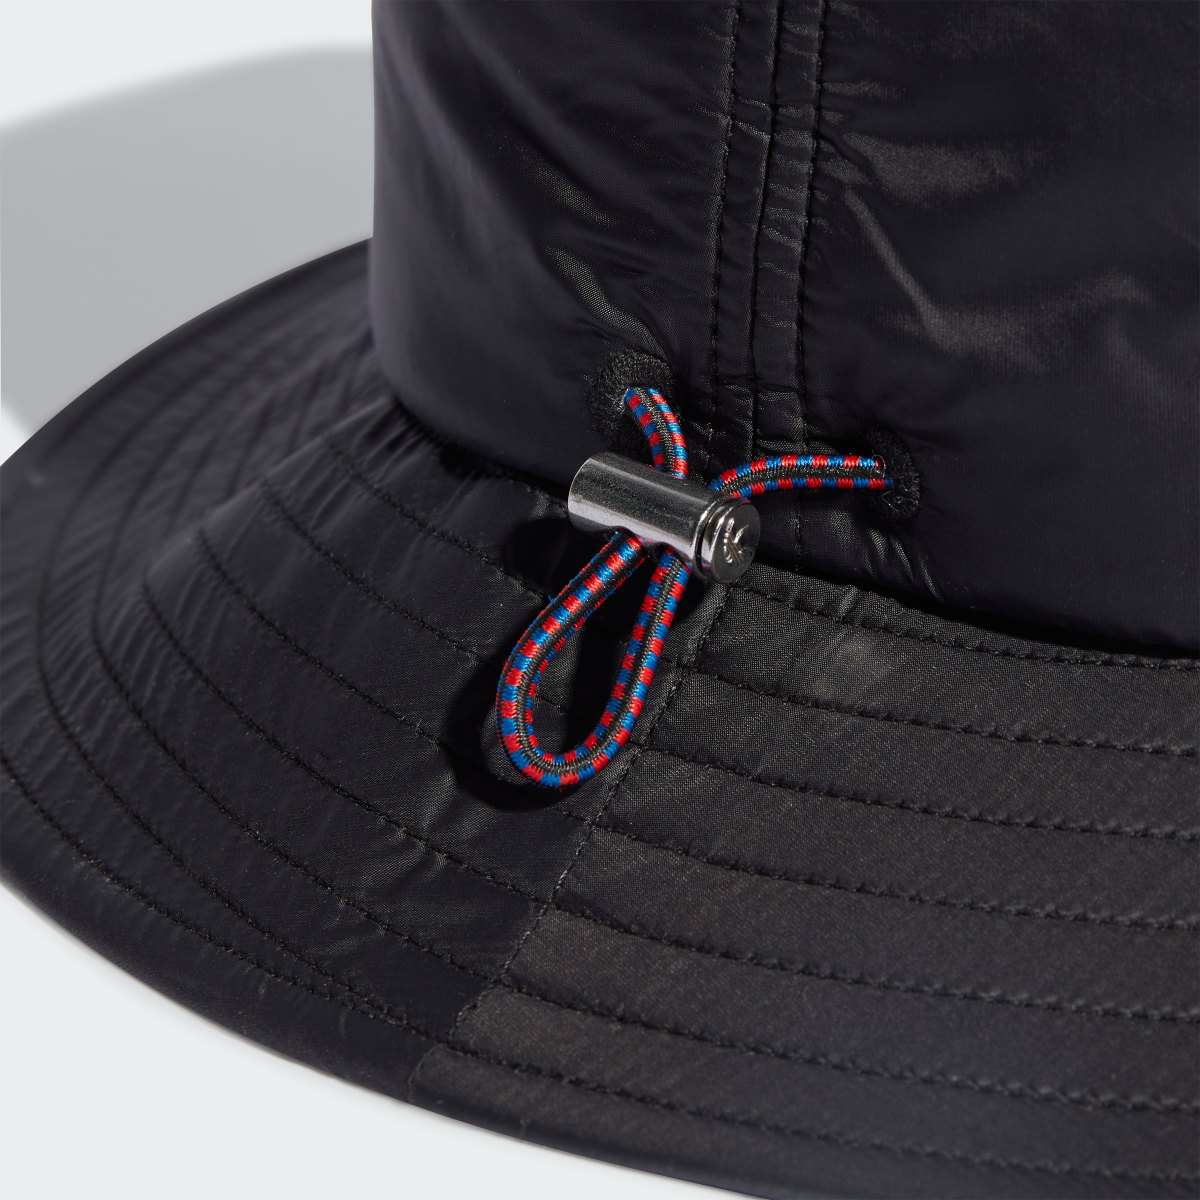 Adidas Quilted Trefoil Bucket Hat. 5